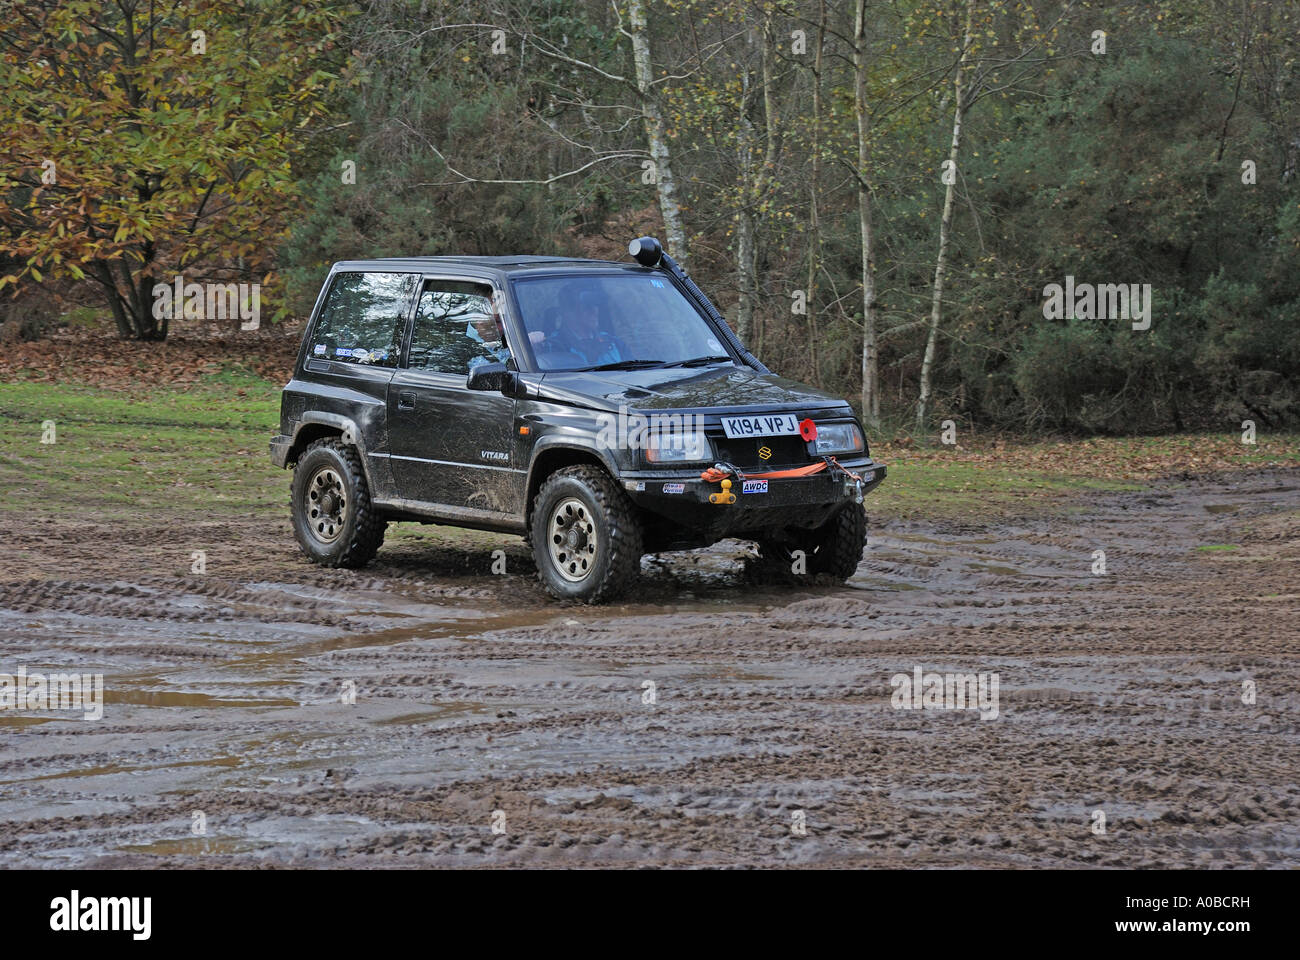 D0001077 Suzuki Vitara 4WD at a Broxhead Common Bordon Drive Round UK Front towing ball for manoeuvring trailers Stock Photo